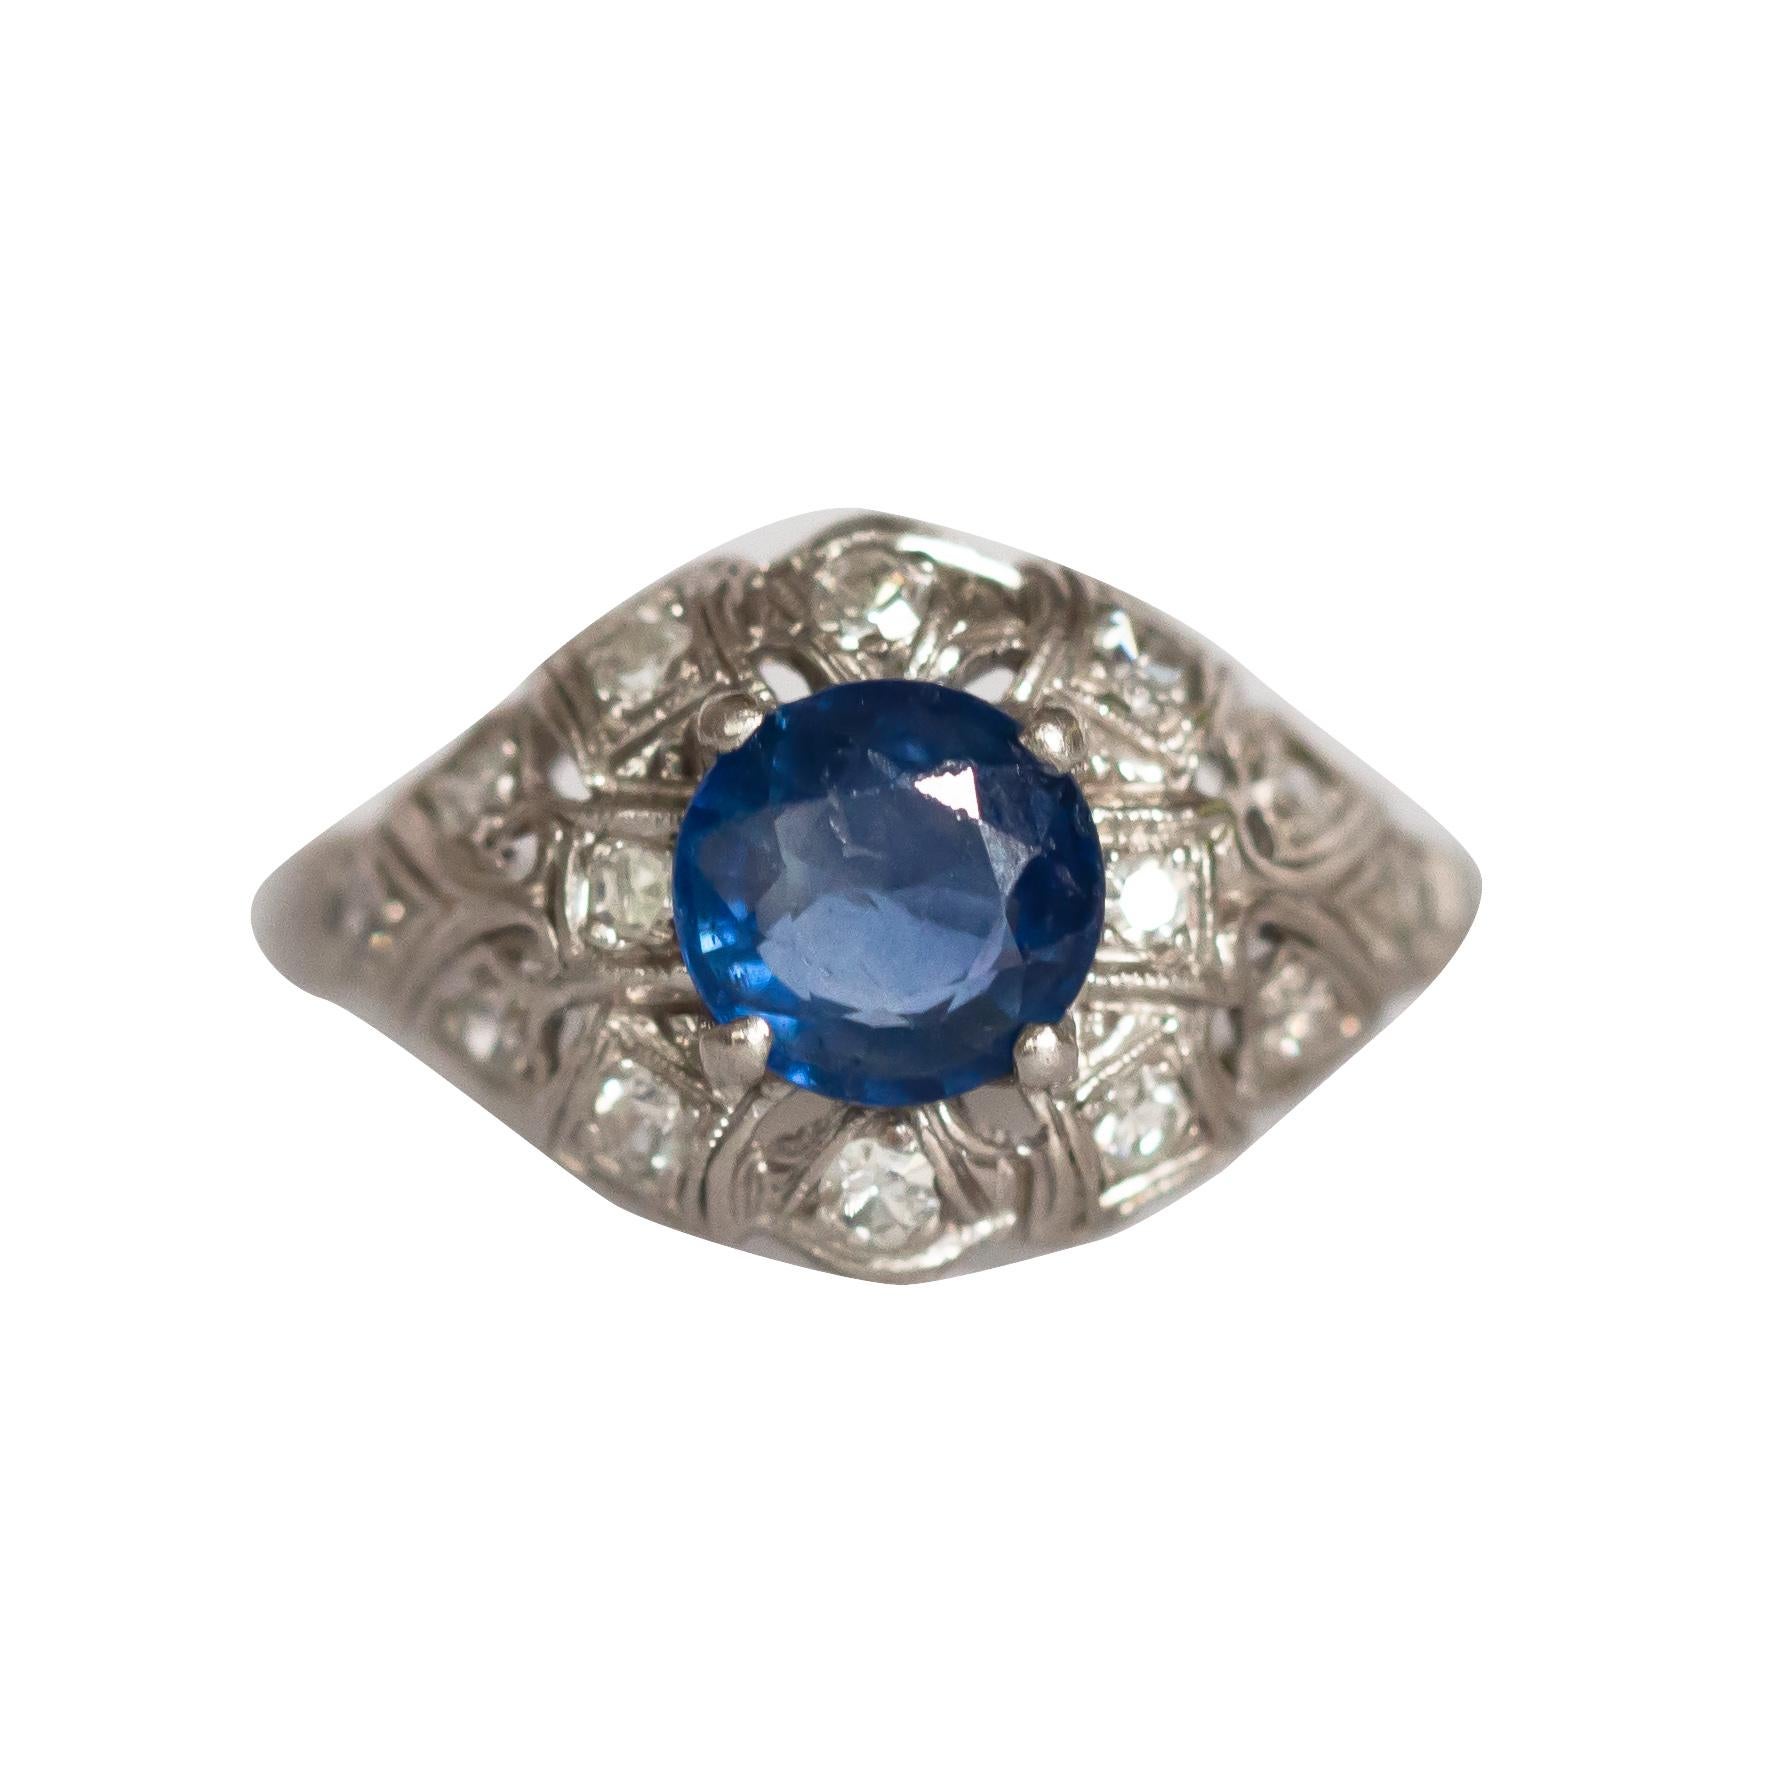 Ring Size: 5.5
Metal Type: Platinum  [Hallmarked, and Tested]
Weight:  2.5 grams

Center Stone Details:
Type: Sapphire, Natural
Weight: 1.00 carat
Cut: Transitional Round
Color: Blue
Clarity: SI2

Side Diamond Details:
Weight: .15 carat, total